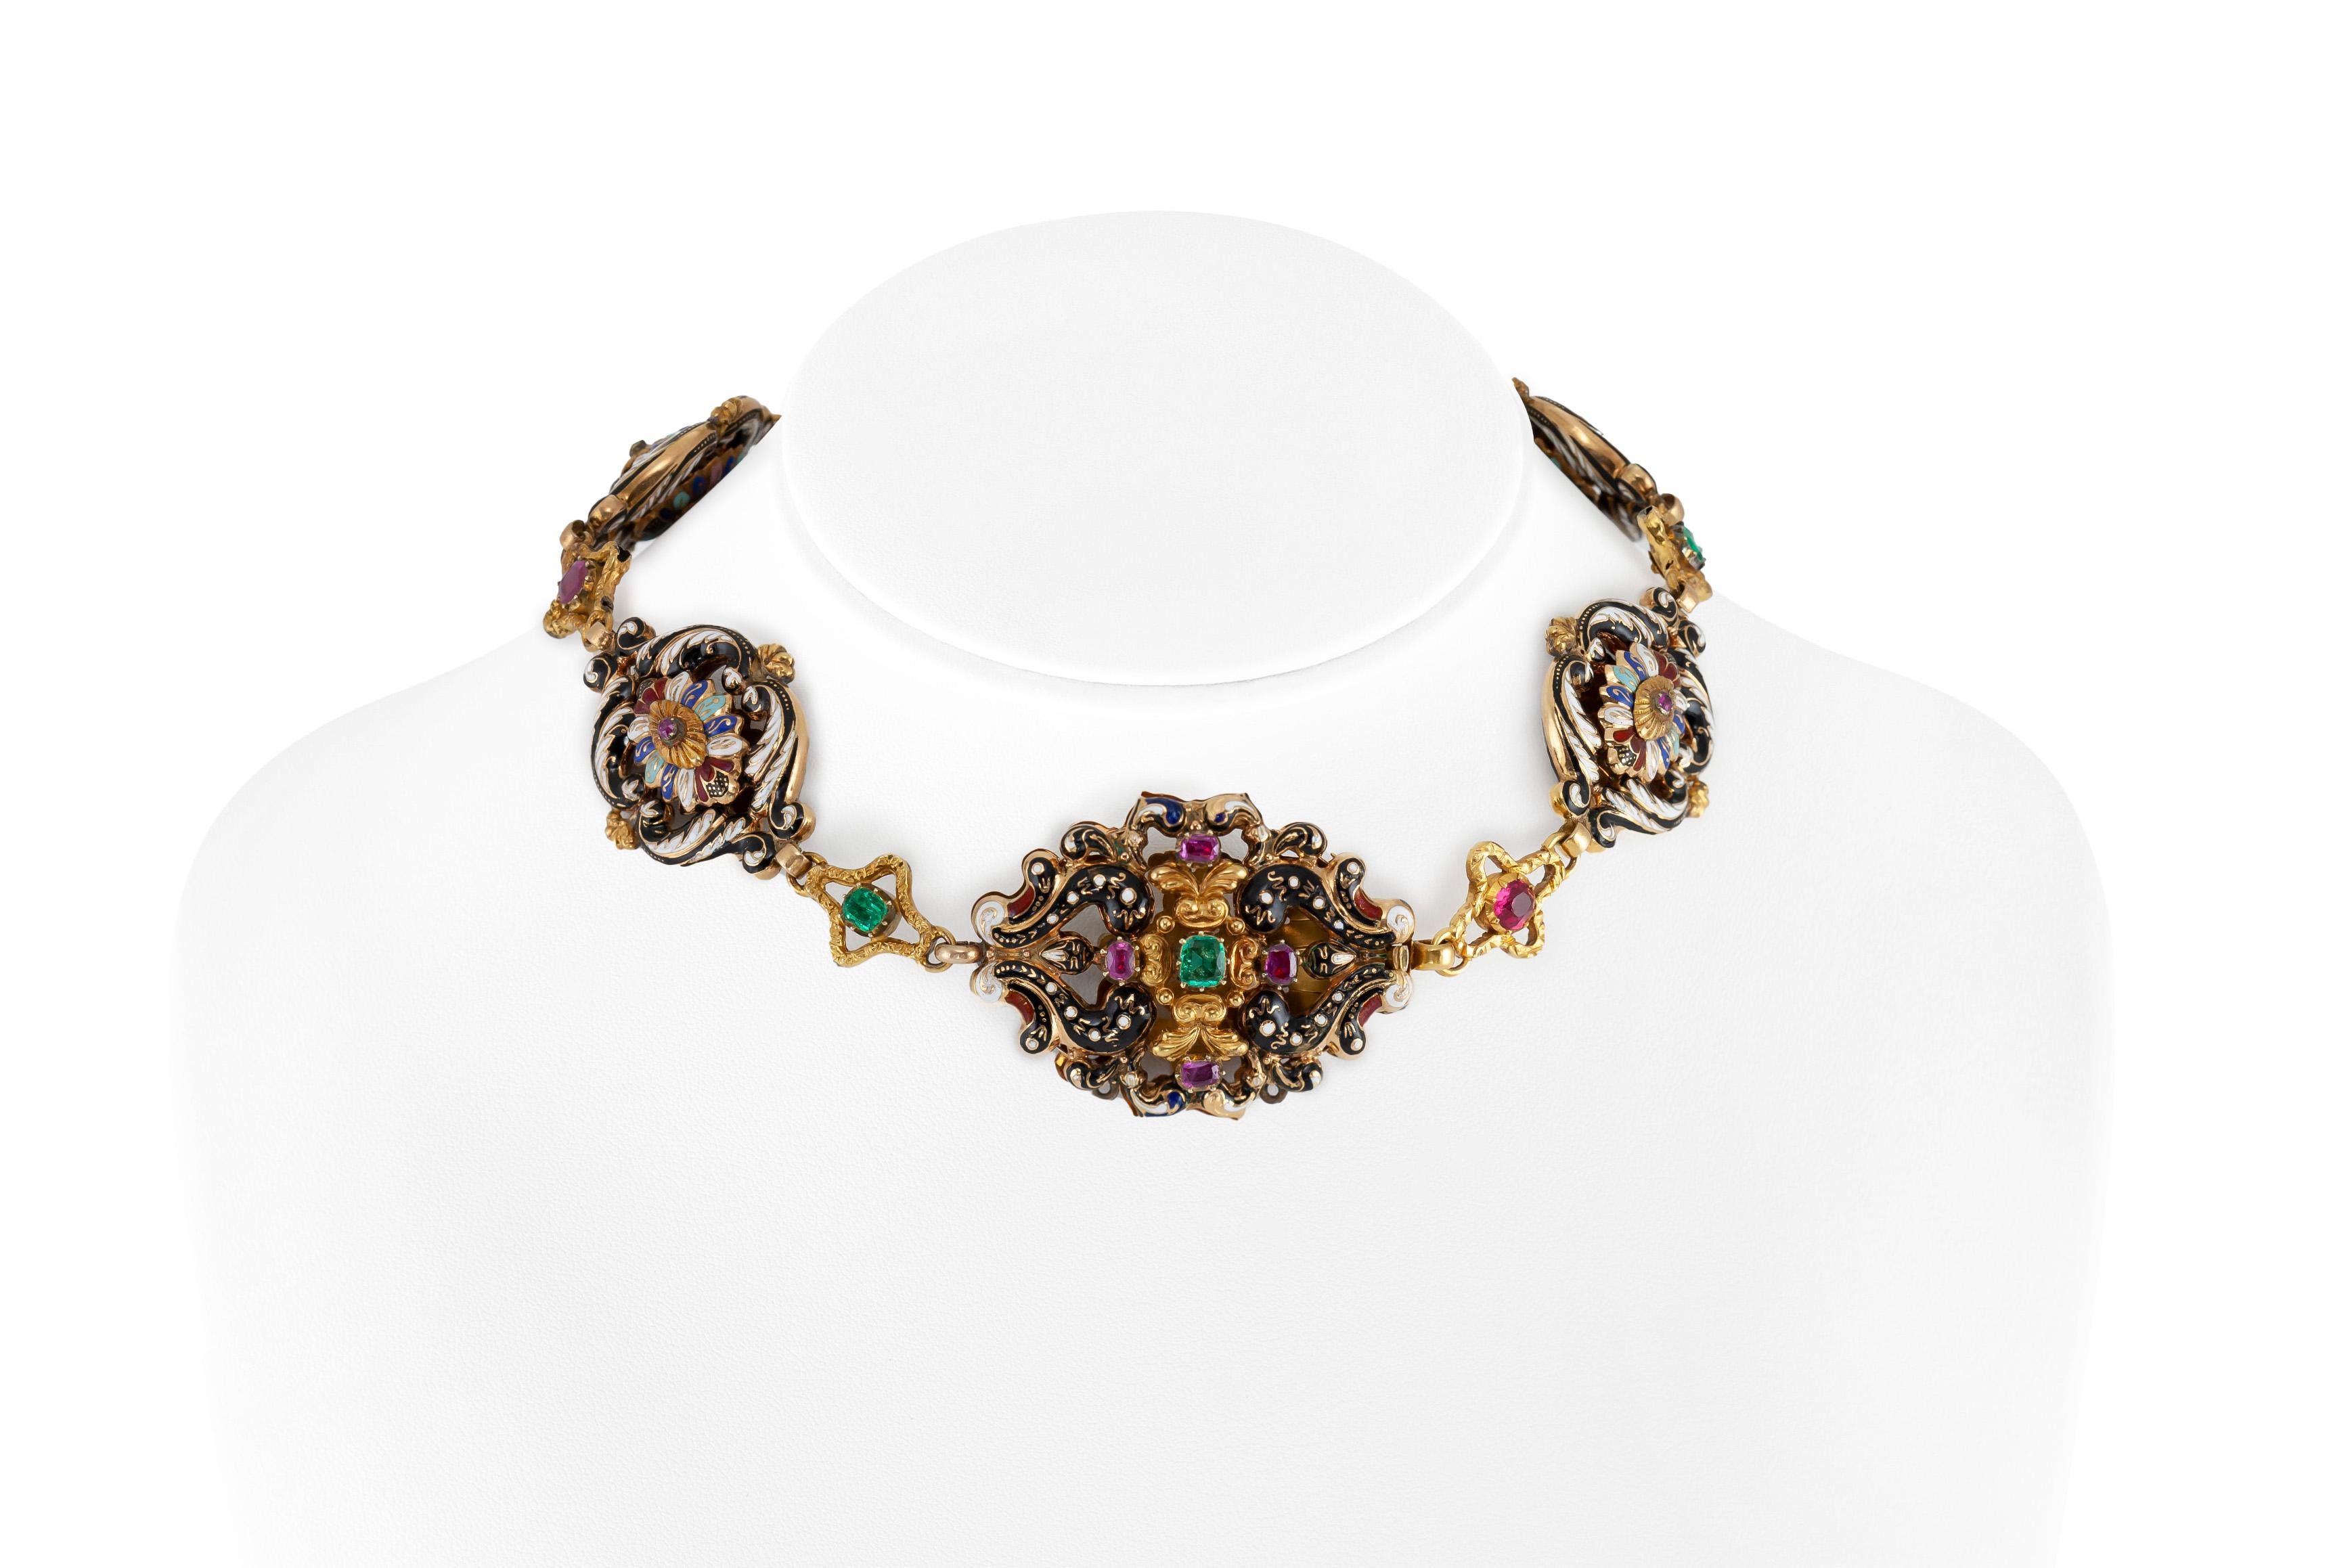 The necklace is finely crafted in 18k yellow gold with enamel and weighing approximately total of 44.1 DWT.

